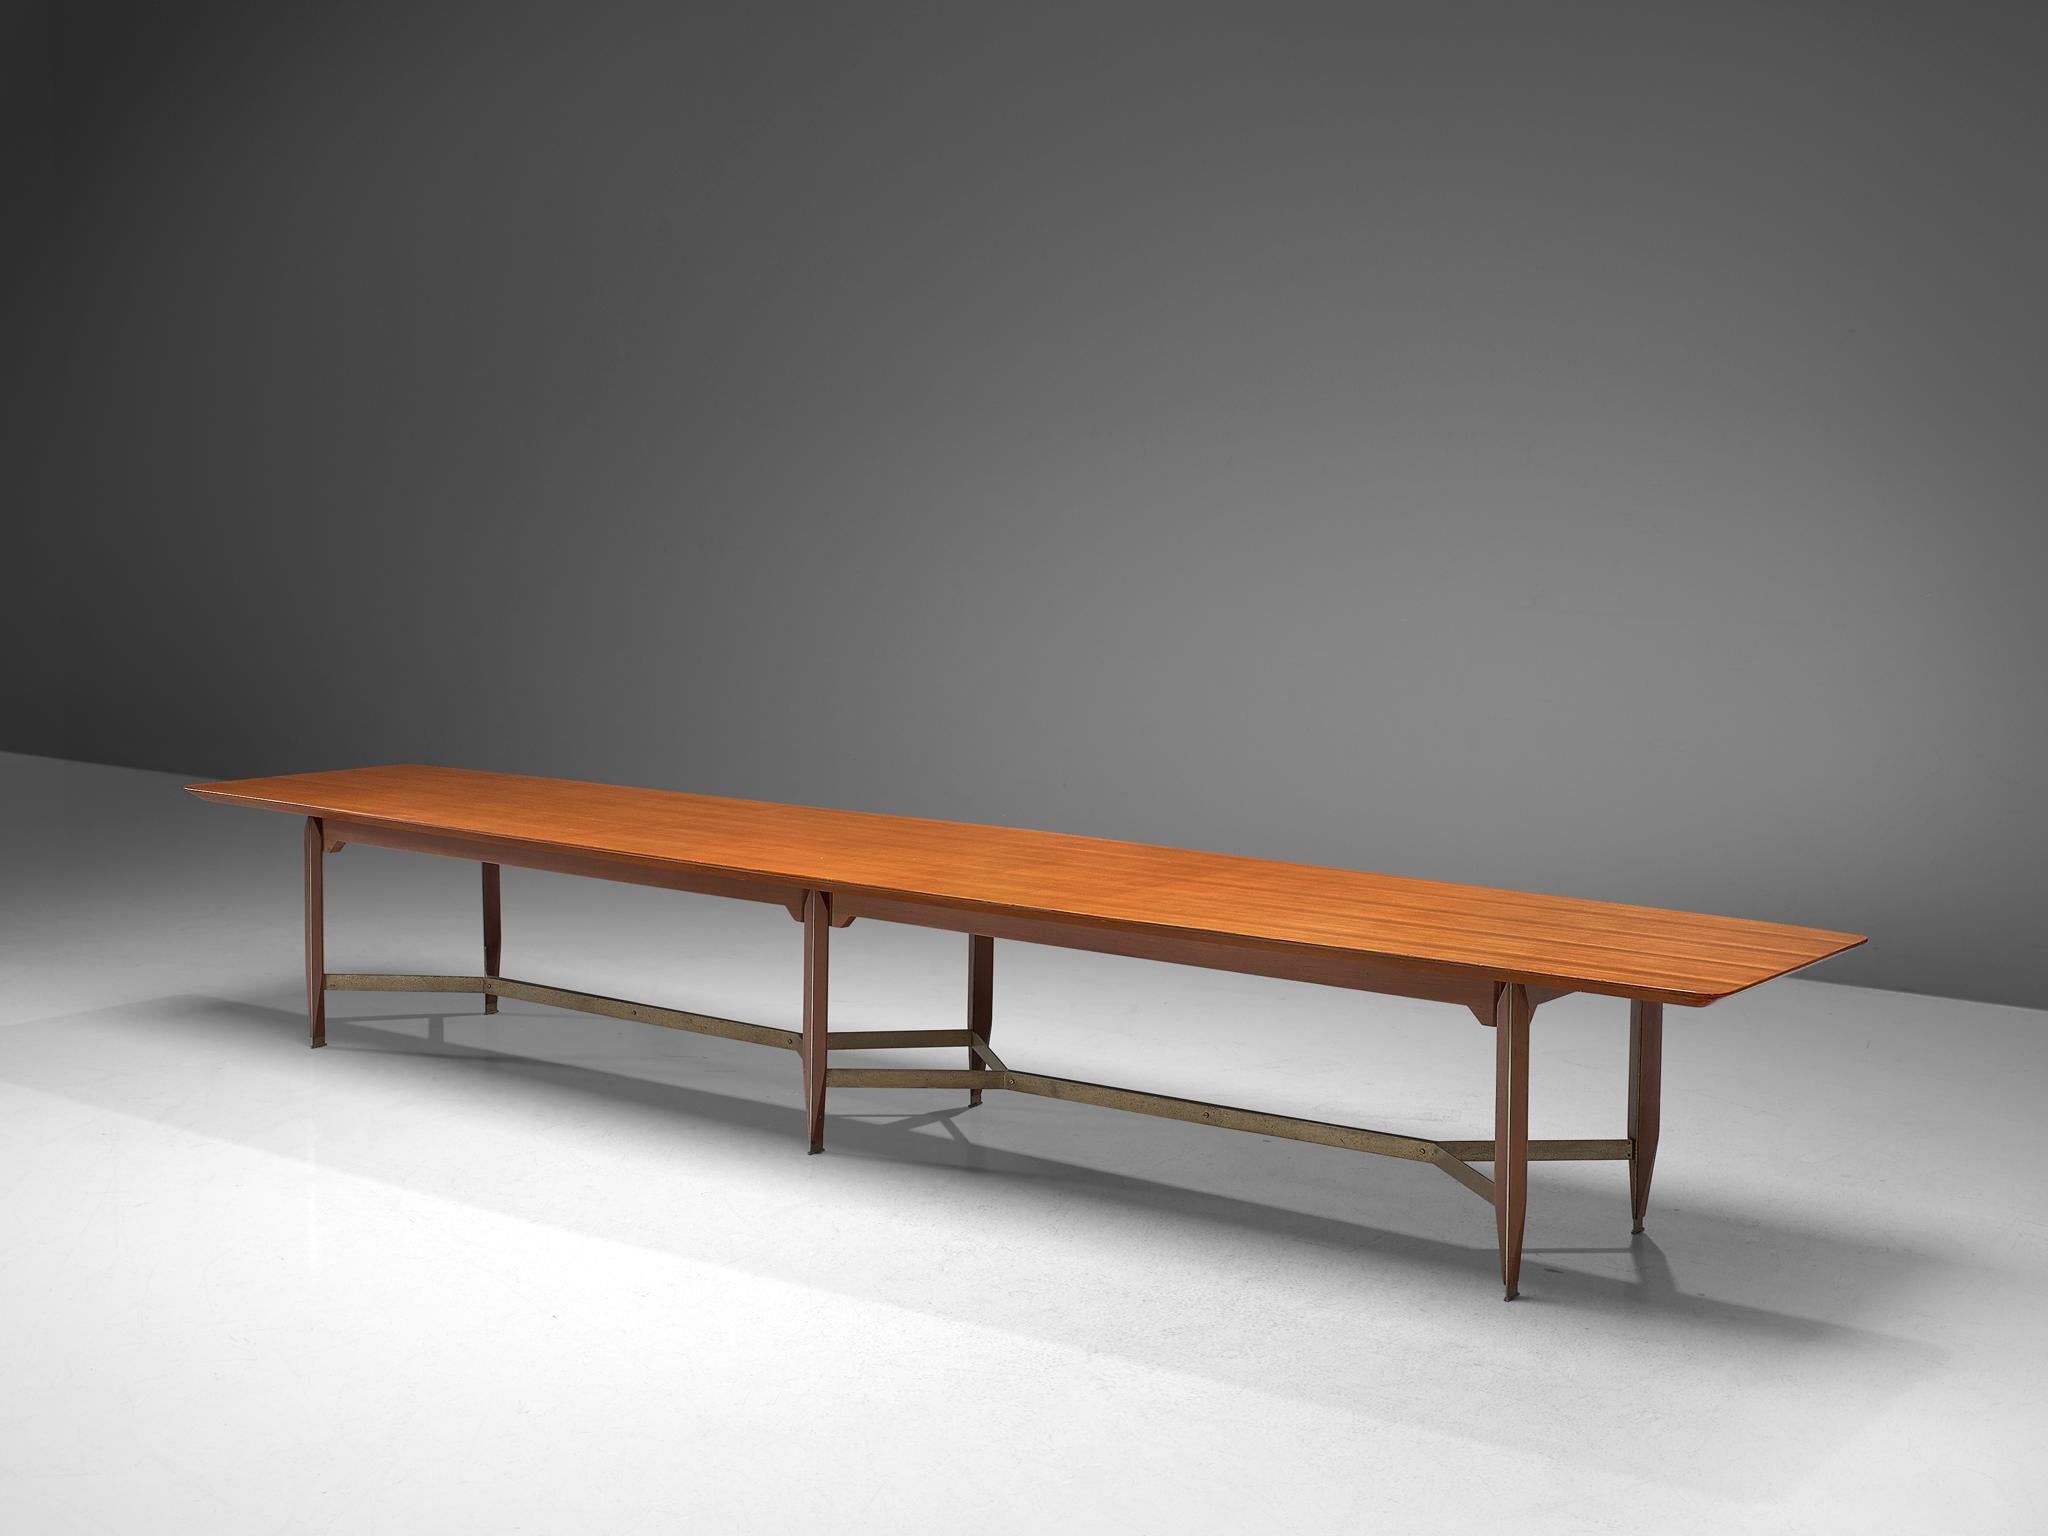 Giulio Moscatelli, conference table, teak, patinated metal, Italy, 1970s

Very large 5 meter conference table designed by Giulio Moscatelli. The tabletop is slightly boat shaped and features a notable base. The six legs are made of teak and a metal